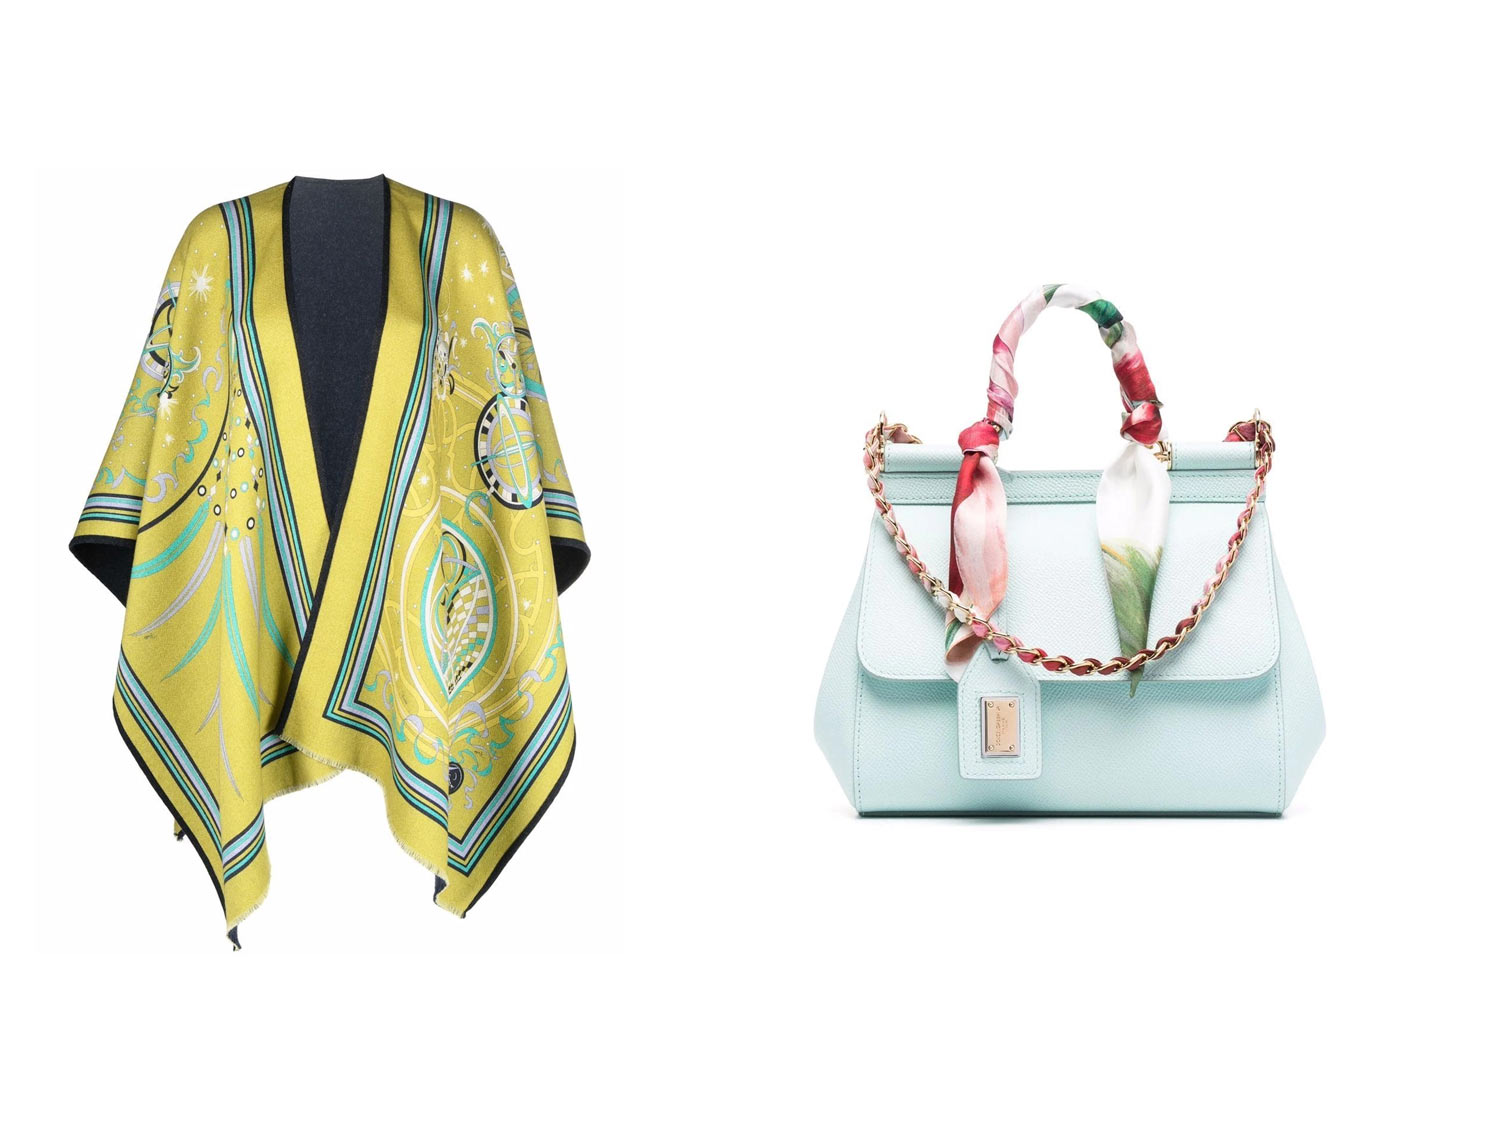 FARFETCH: THE MOTHER’S DAY GIFT GUIDE